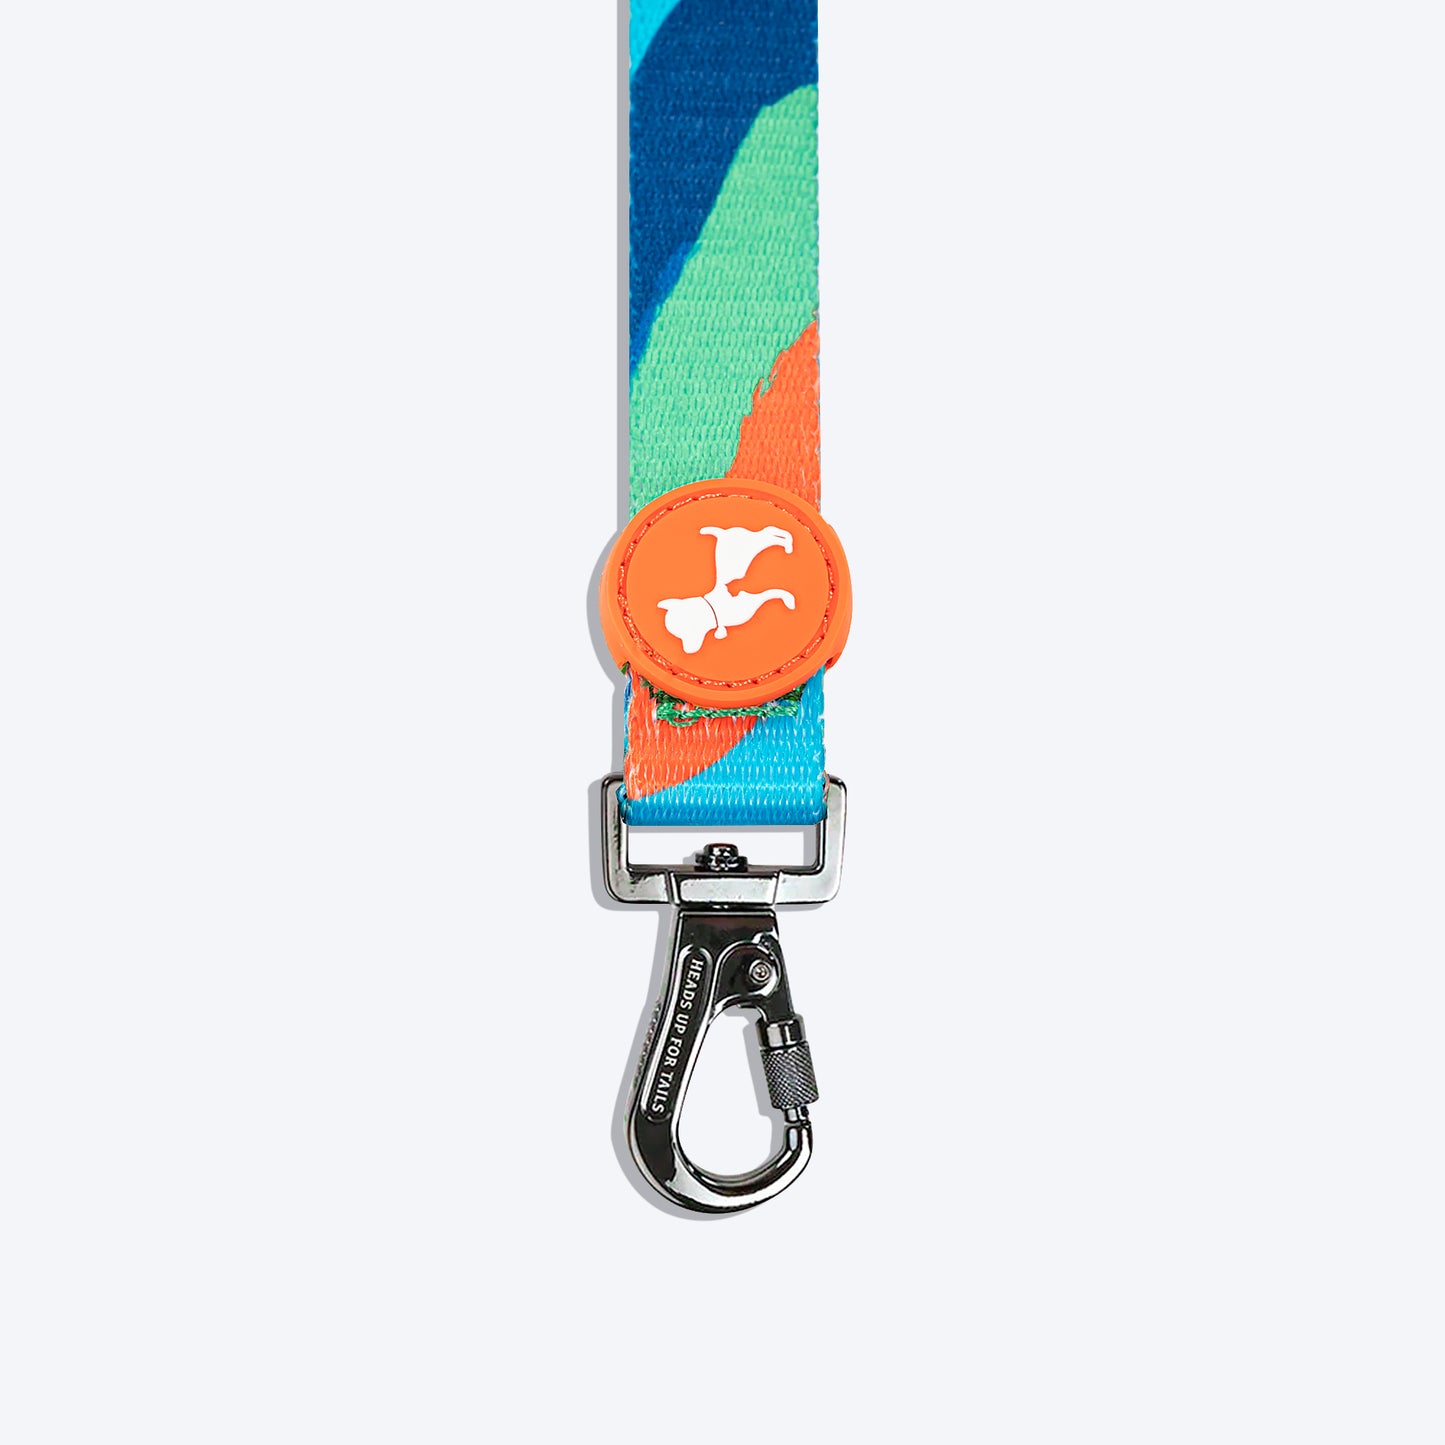 HUFT Wild Waves Printed Dog Leash - Heads Up For Tails